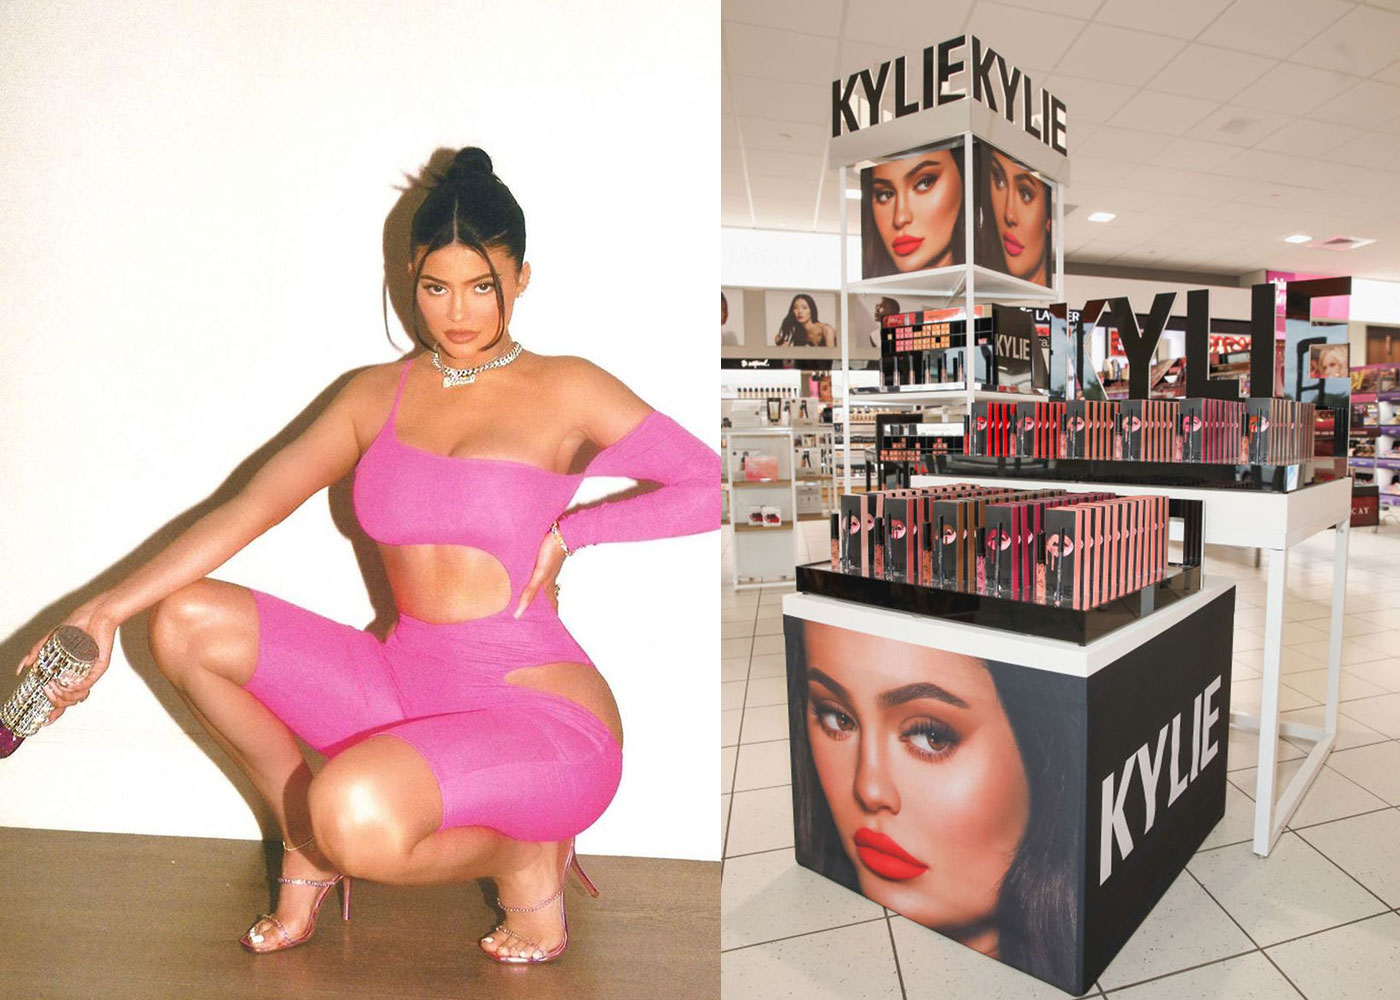 Kylie Jenner Sold A 600 Million Majority Stake In Kylie Cosmetics To Coty